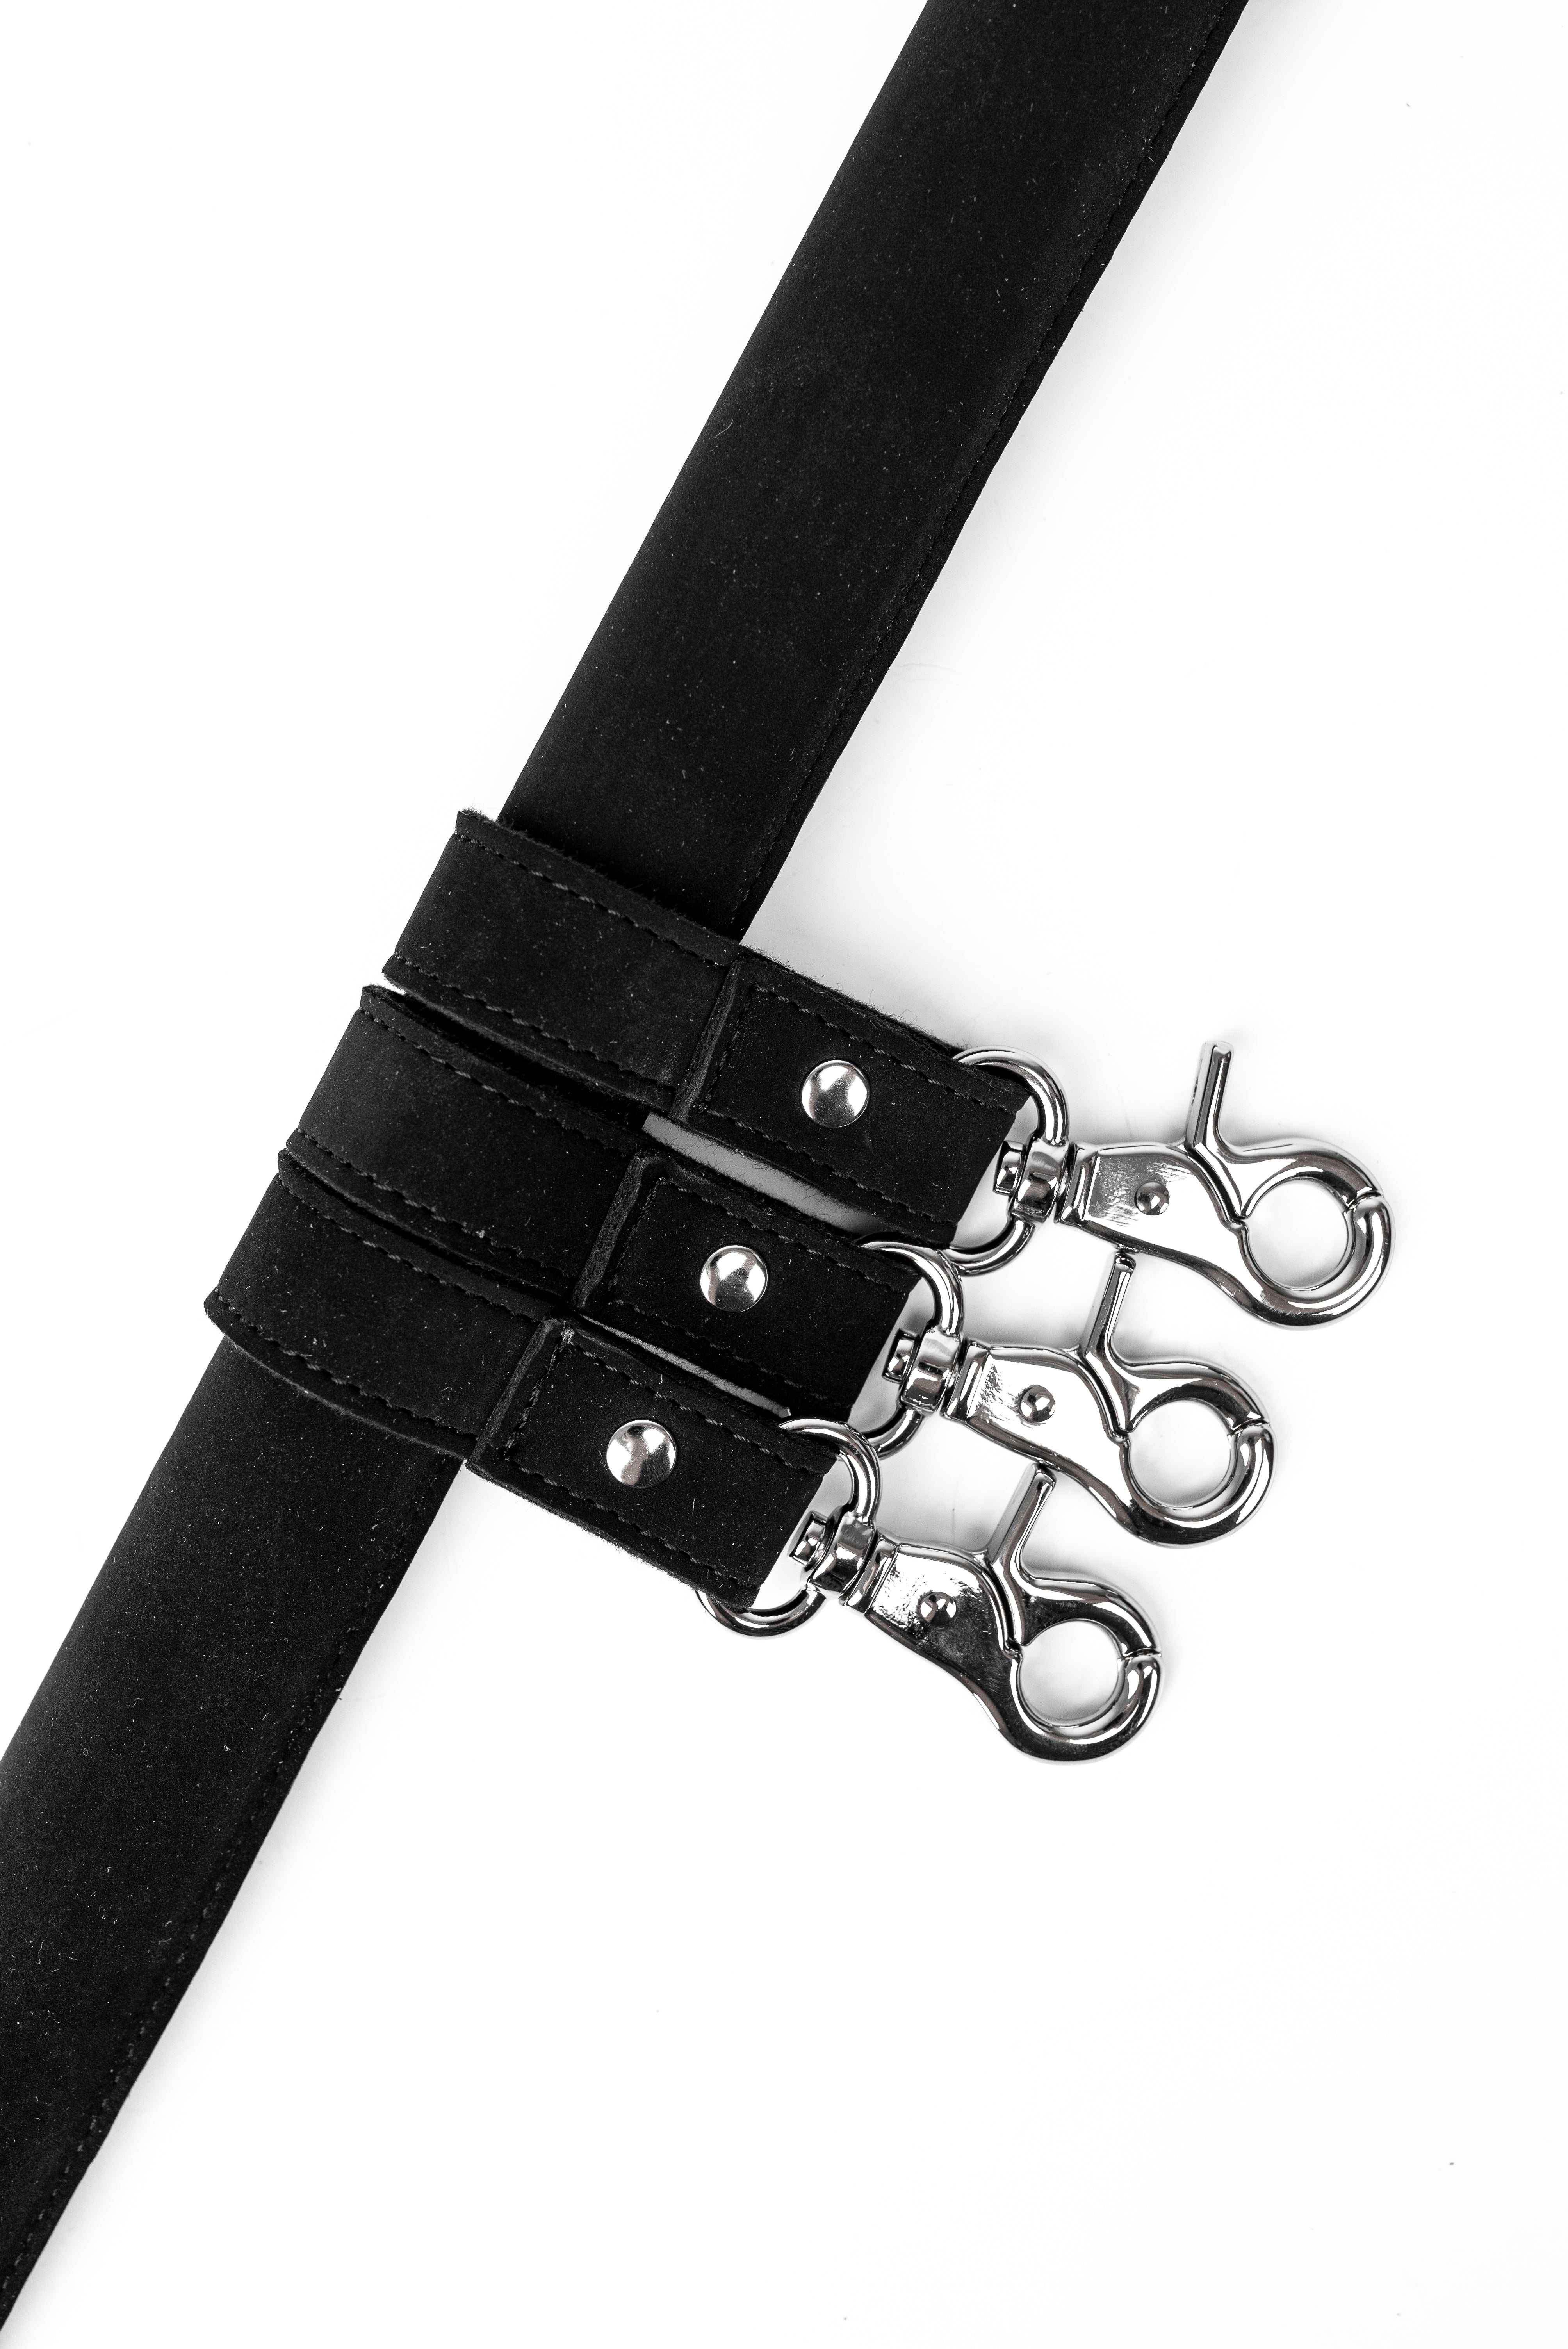 5 Point BDSM Faux Leather Spreader Bar with cuff hooks